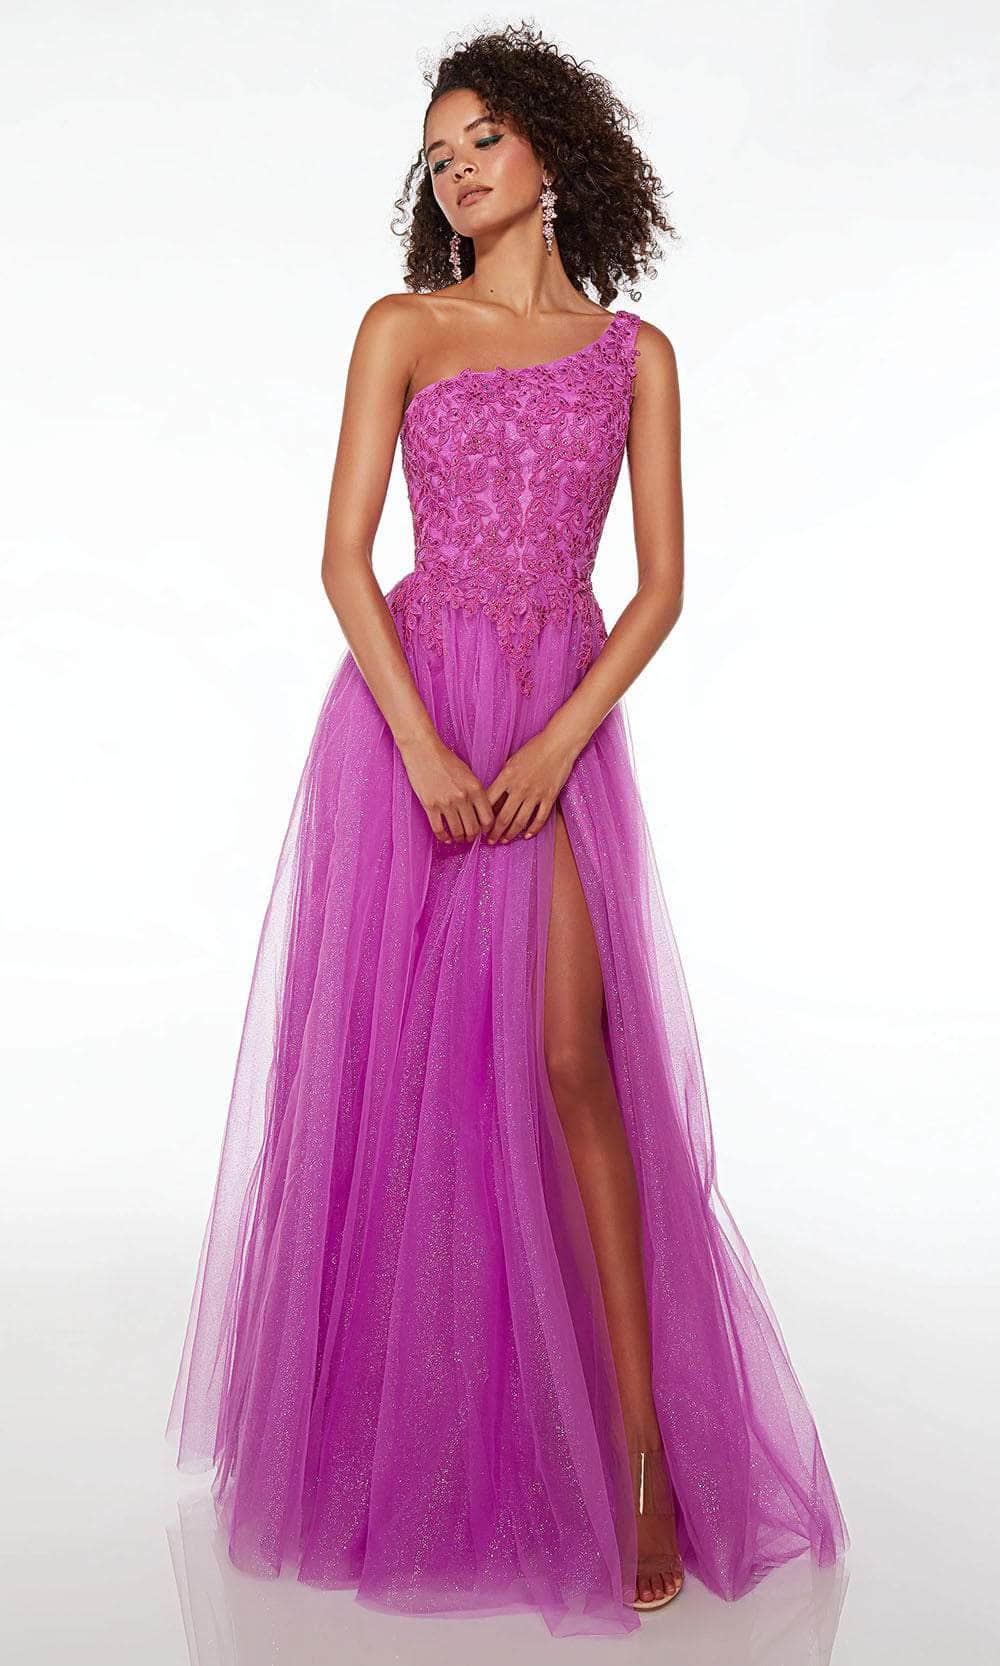 Alyce Paris 61624 - Cutout Lace-Up Back Prom Gown Special Occasion Dress 000 / Neon Magenta